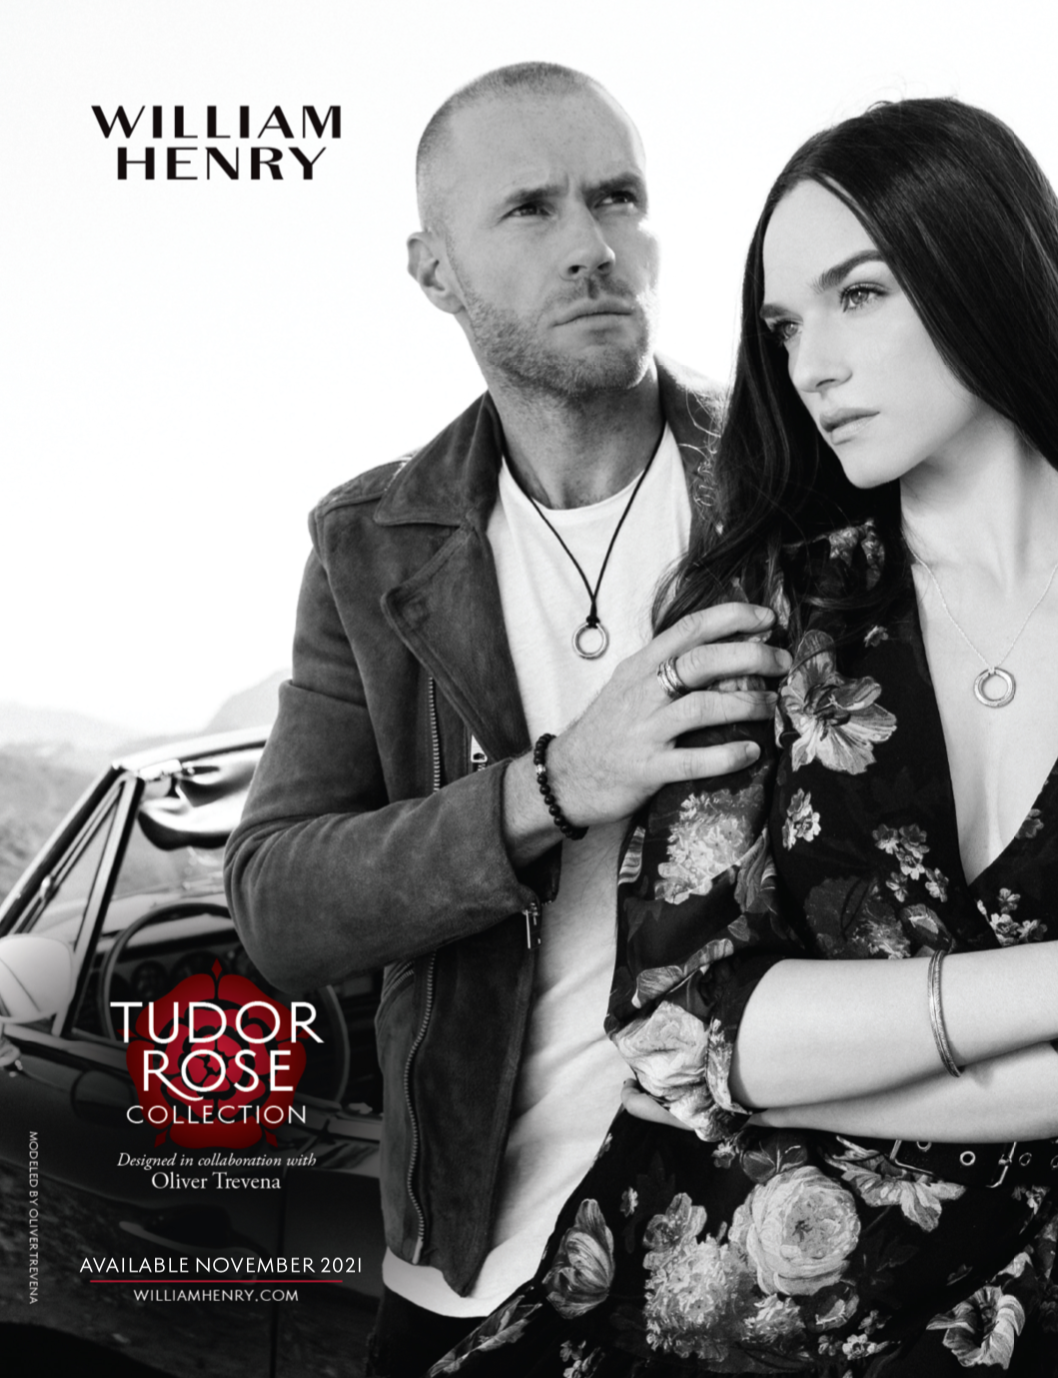 Another image from the Tudor Rose ad campaign showcasing the Unisex collection